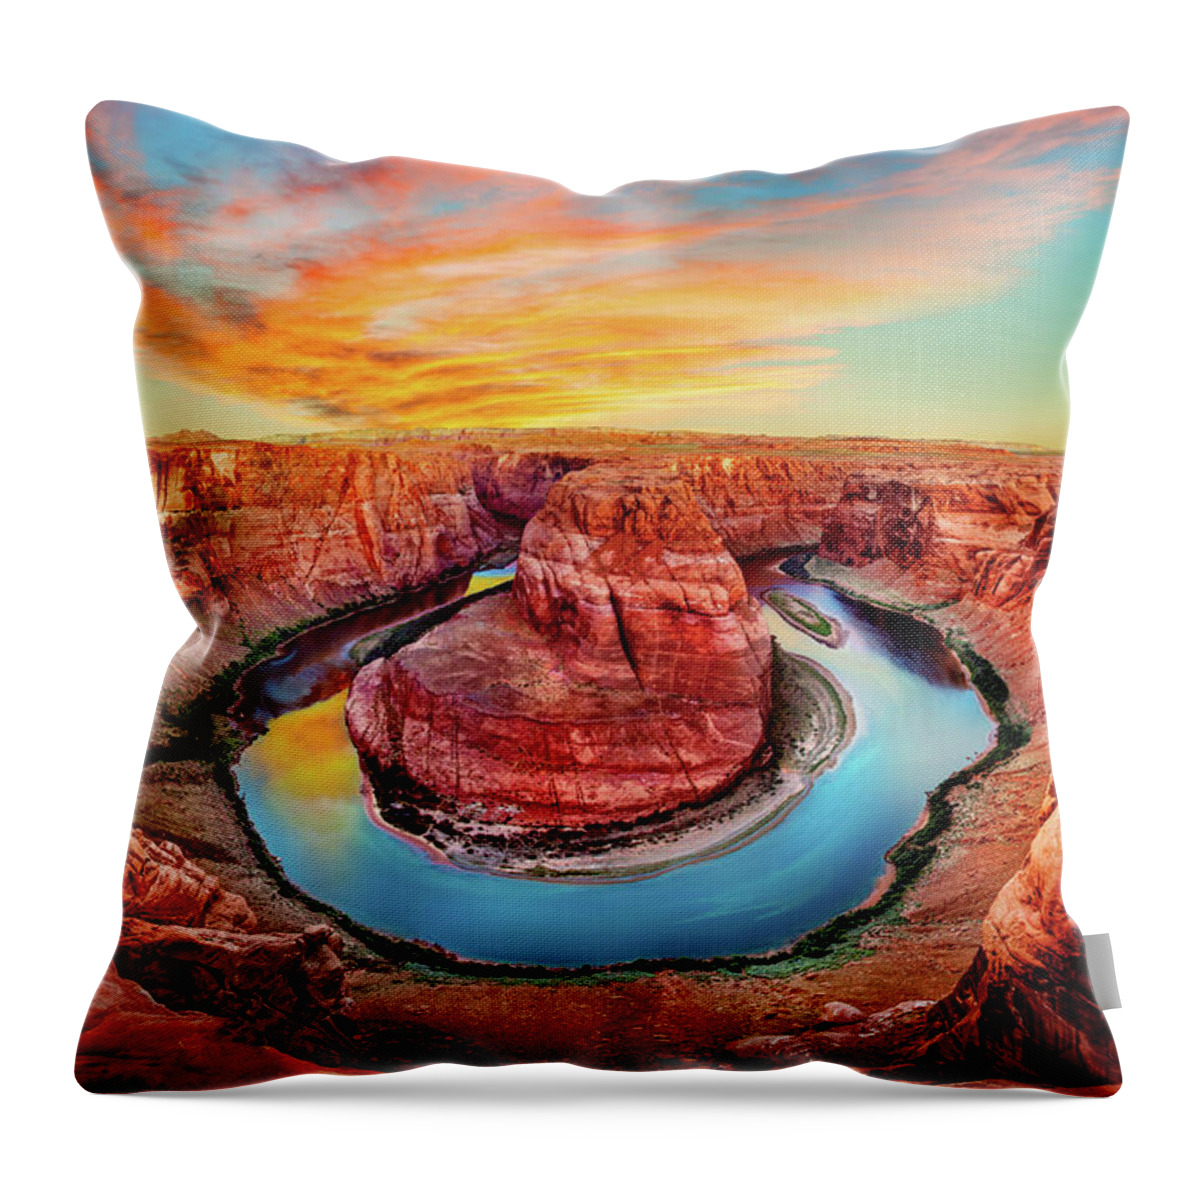 Horseshoe Bend Throw Pillow featuring the photograph Red Planet by Az Jackson